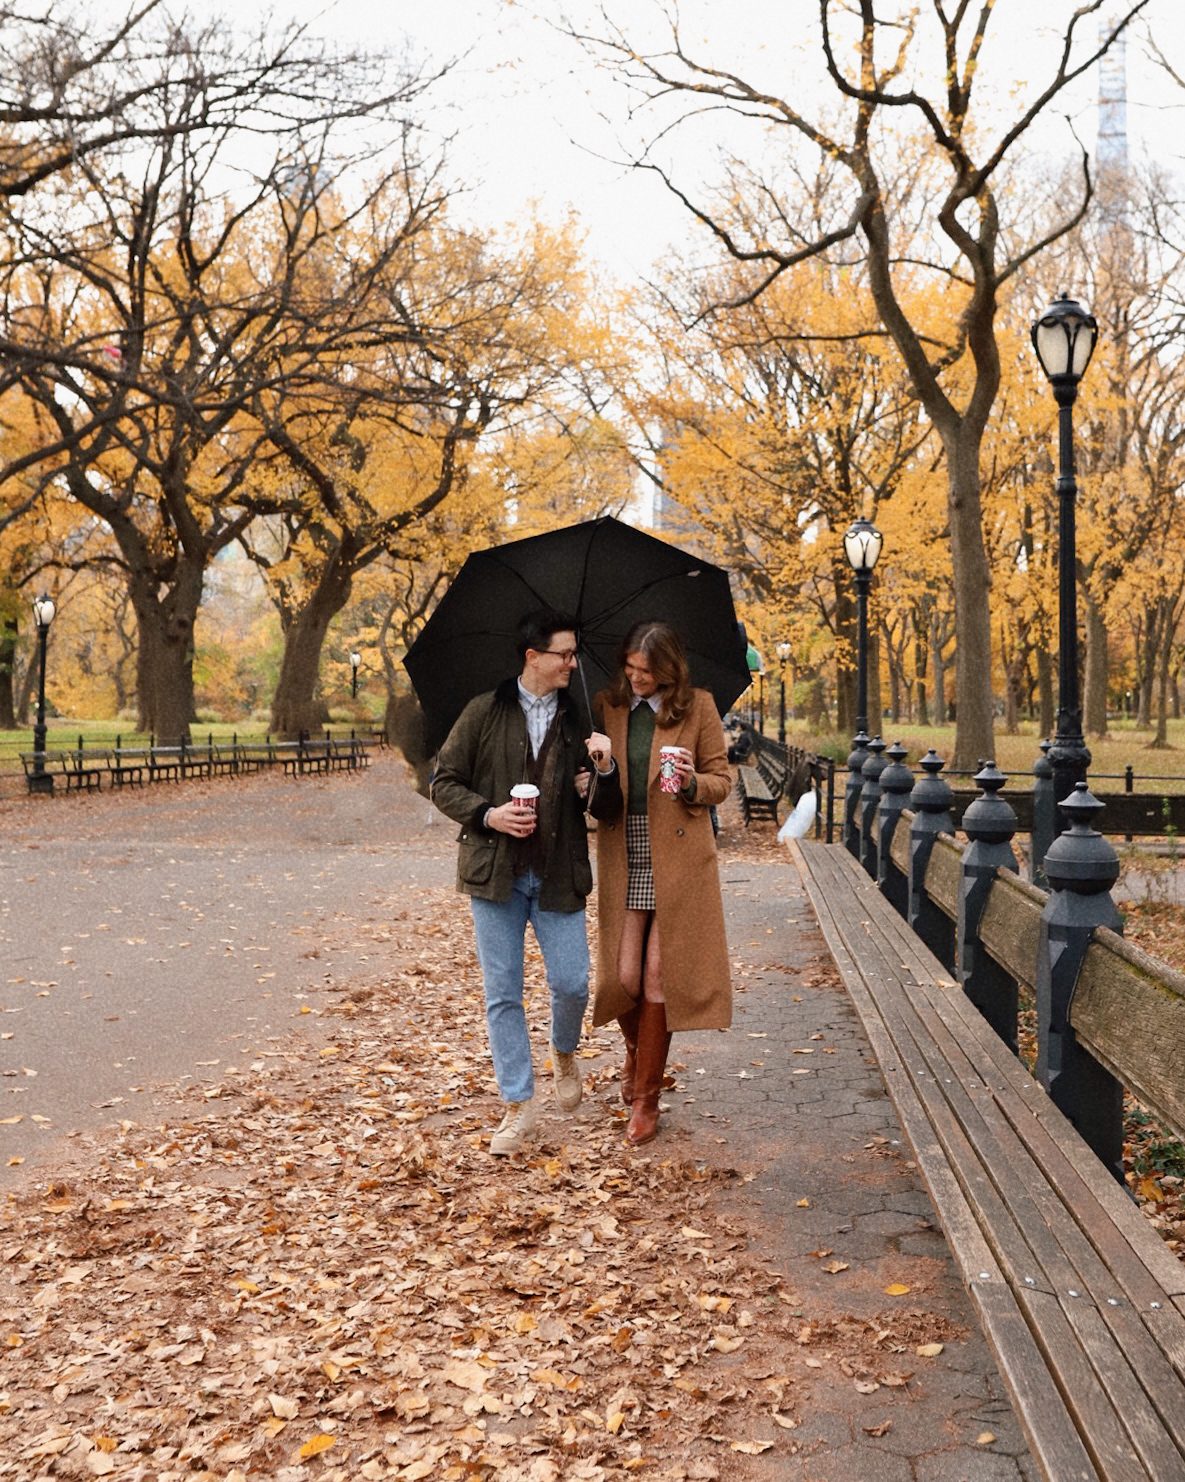 Anna and Nathan walking in Central Park with an umbrella during the fall season.